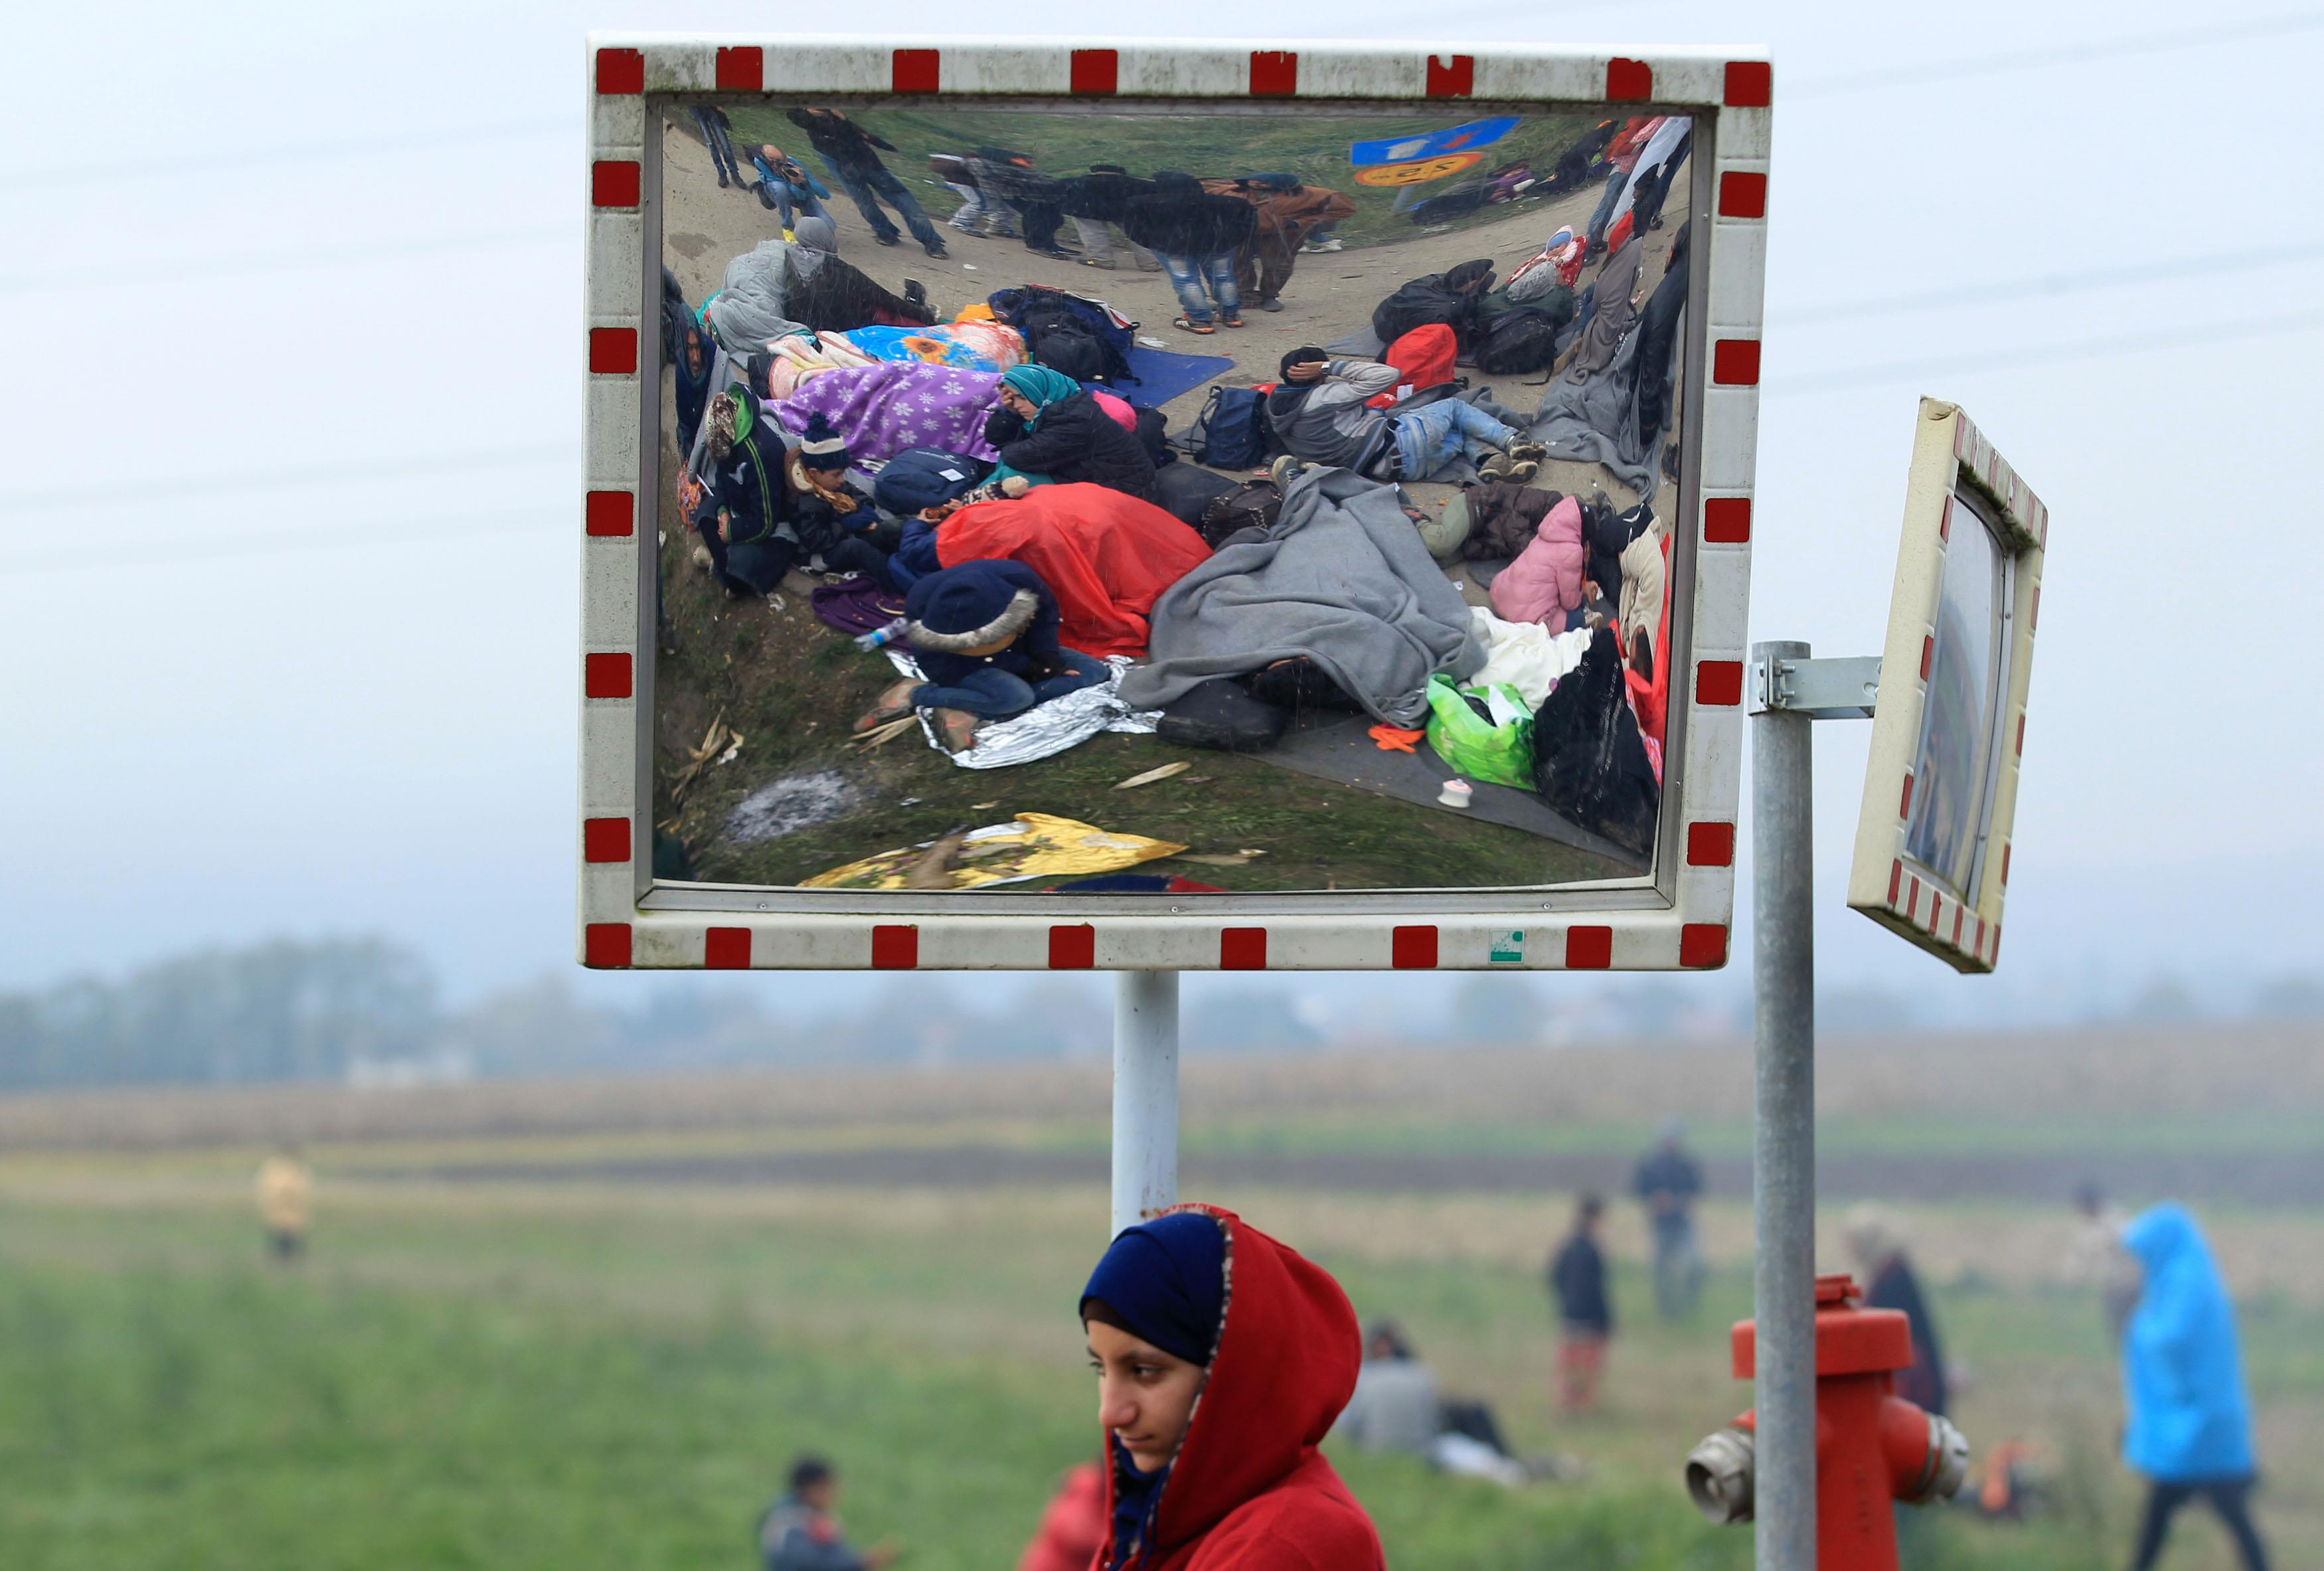 A girl looks on as resting migrants are seen in a street mirror after crossing the border from Croat